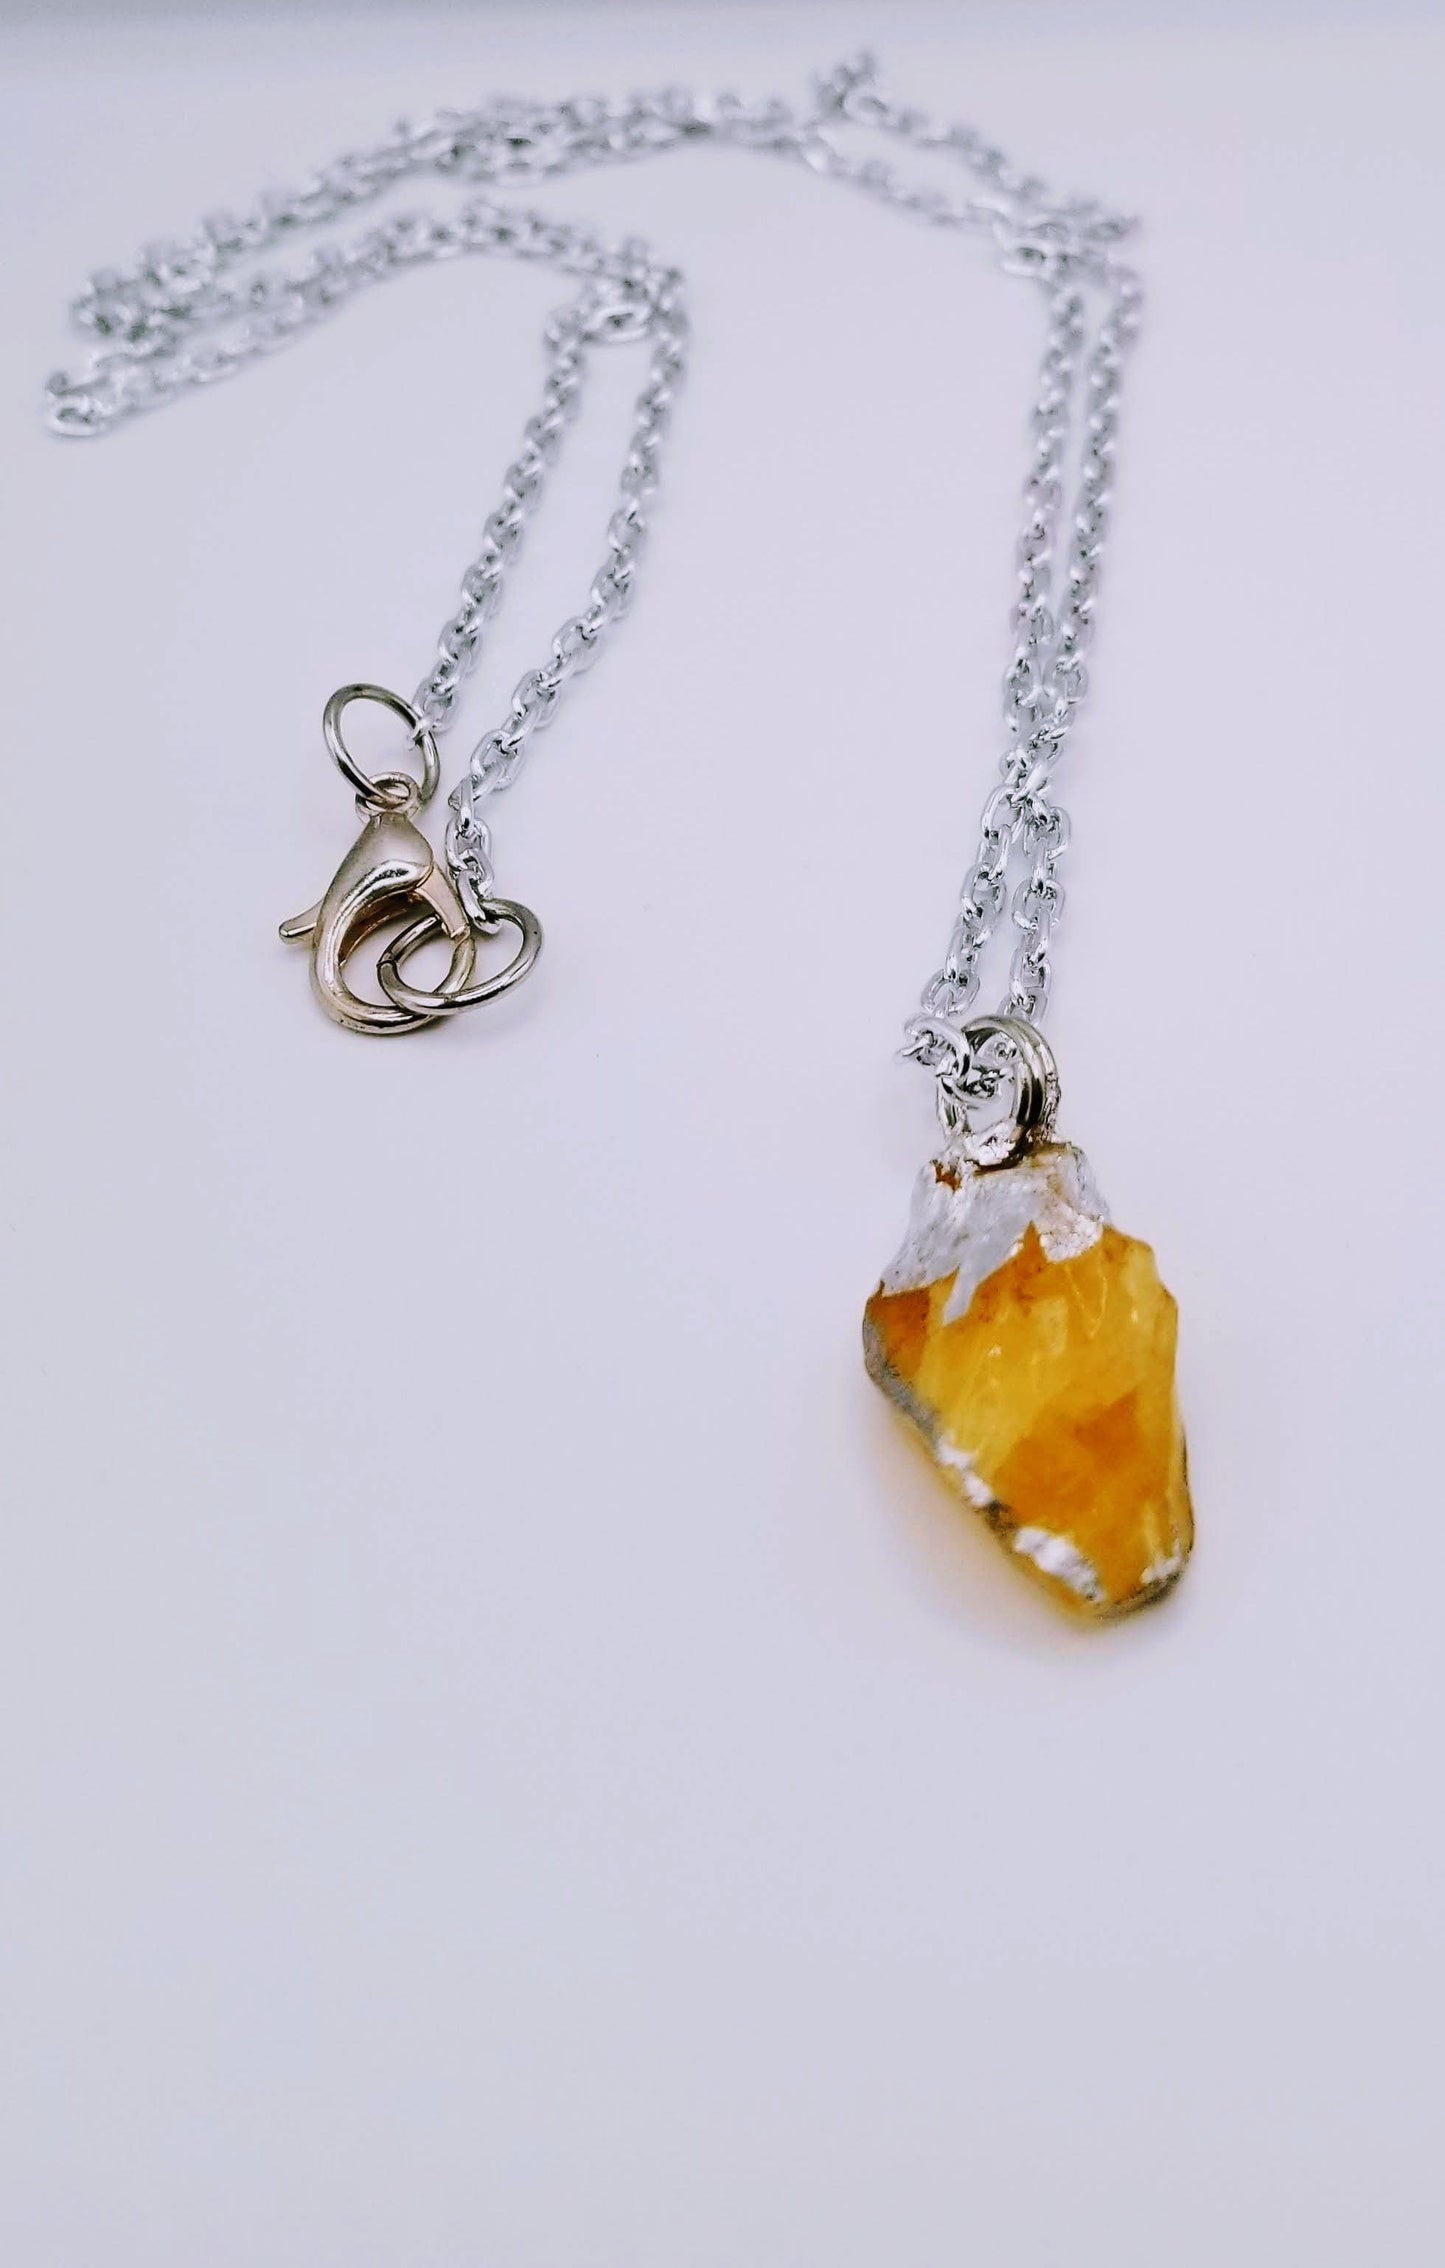 Handcrafted Jewelry By Teri C Necklace Orange quartz with Silverleaf Pendant on silver tone chain